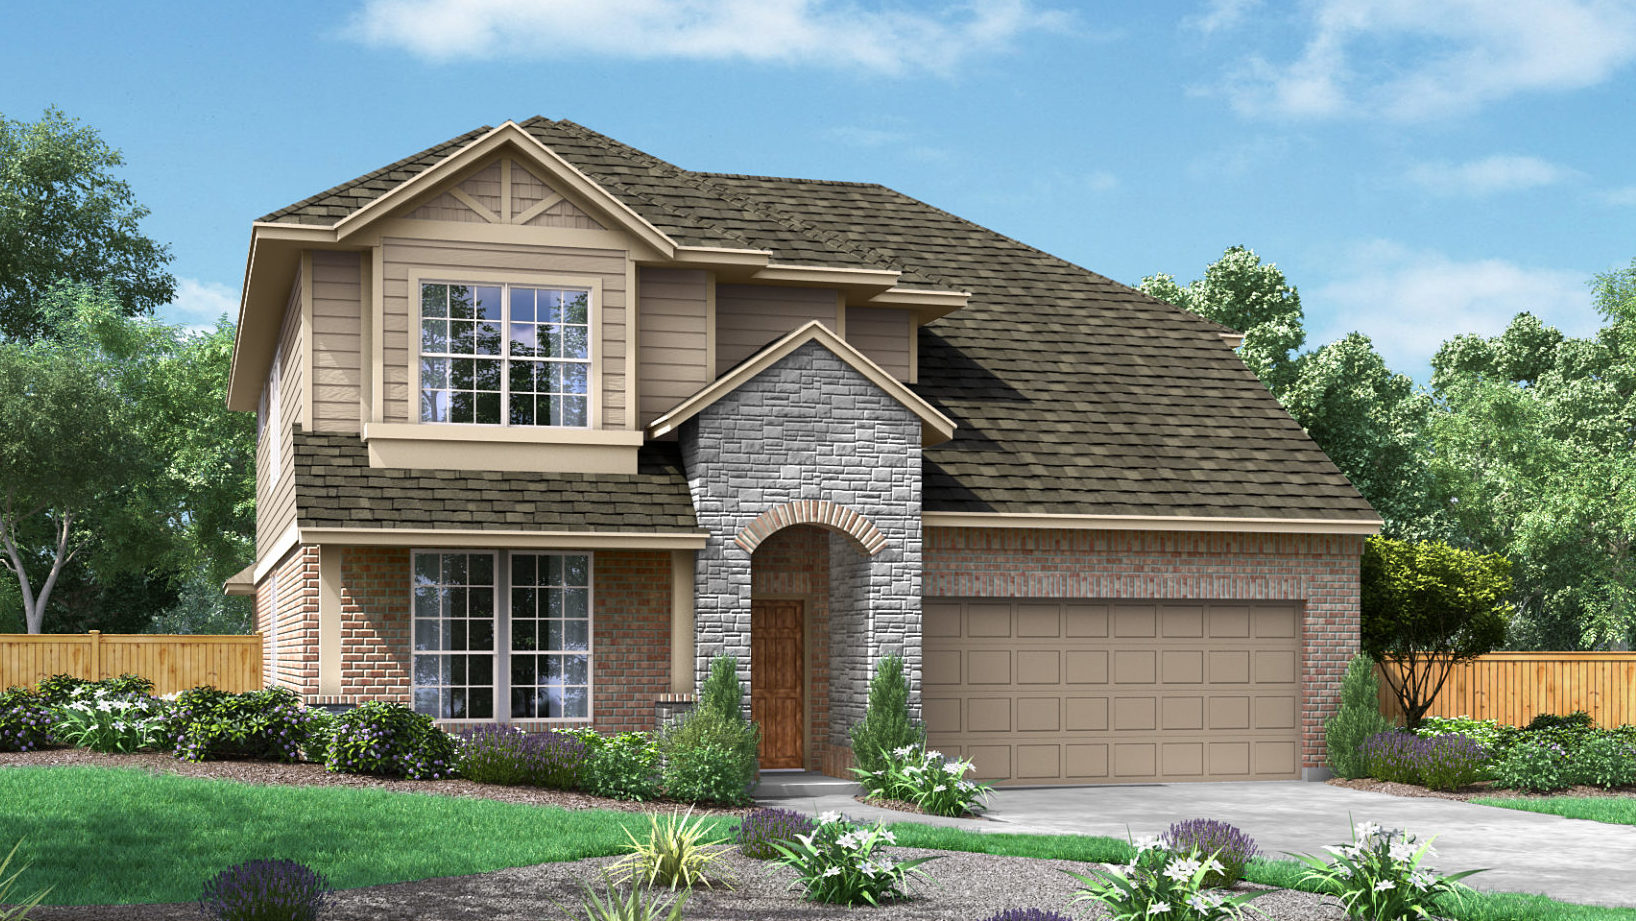 The Fairmont Elevation A Star Ranch New Homes in Hutto